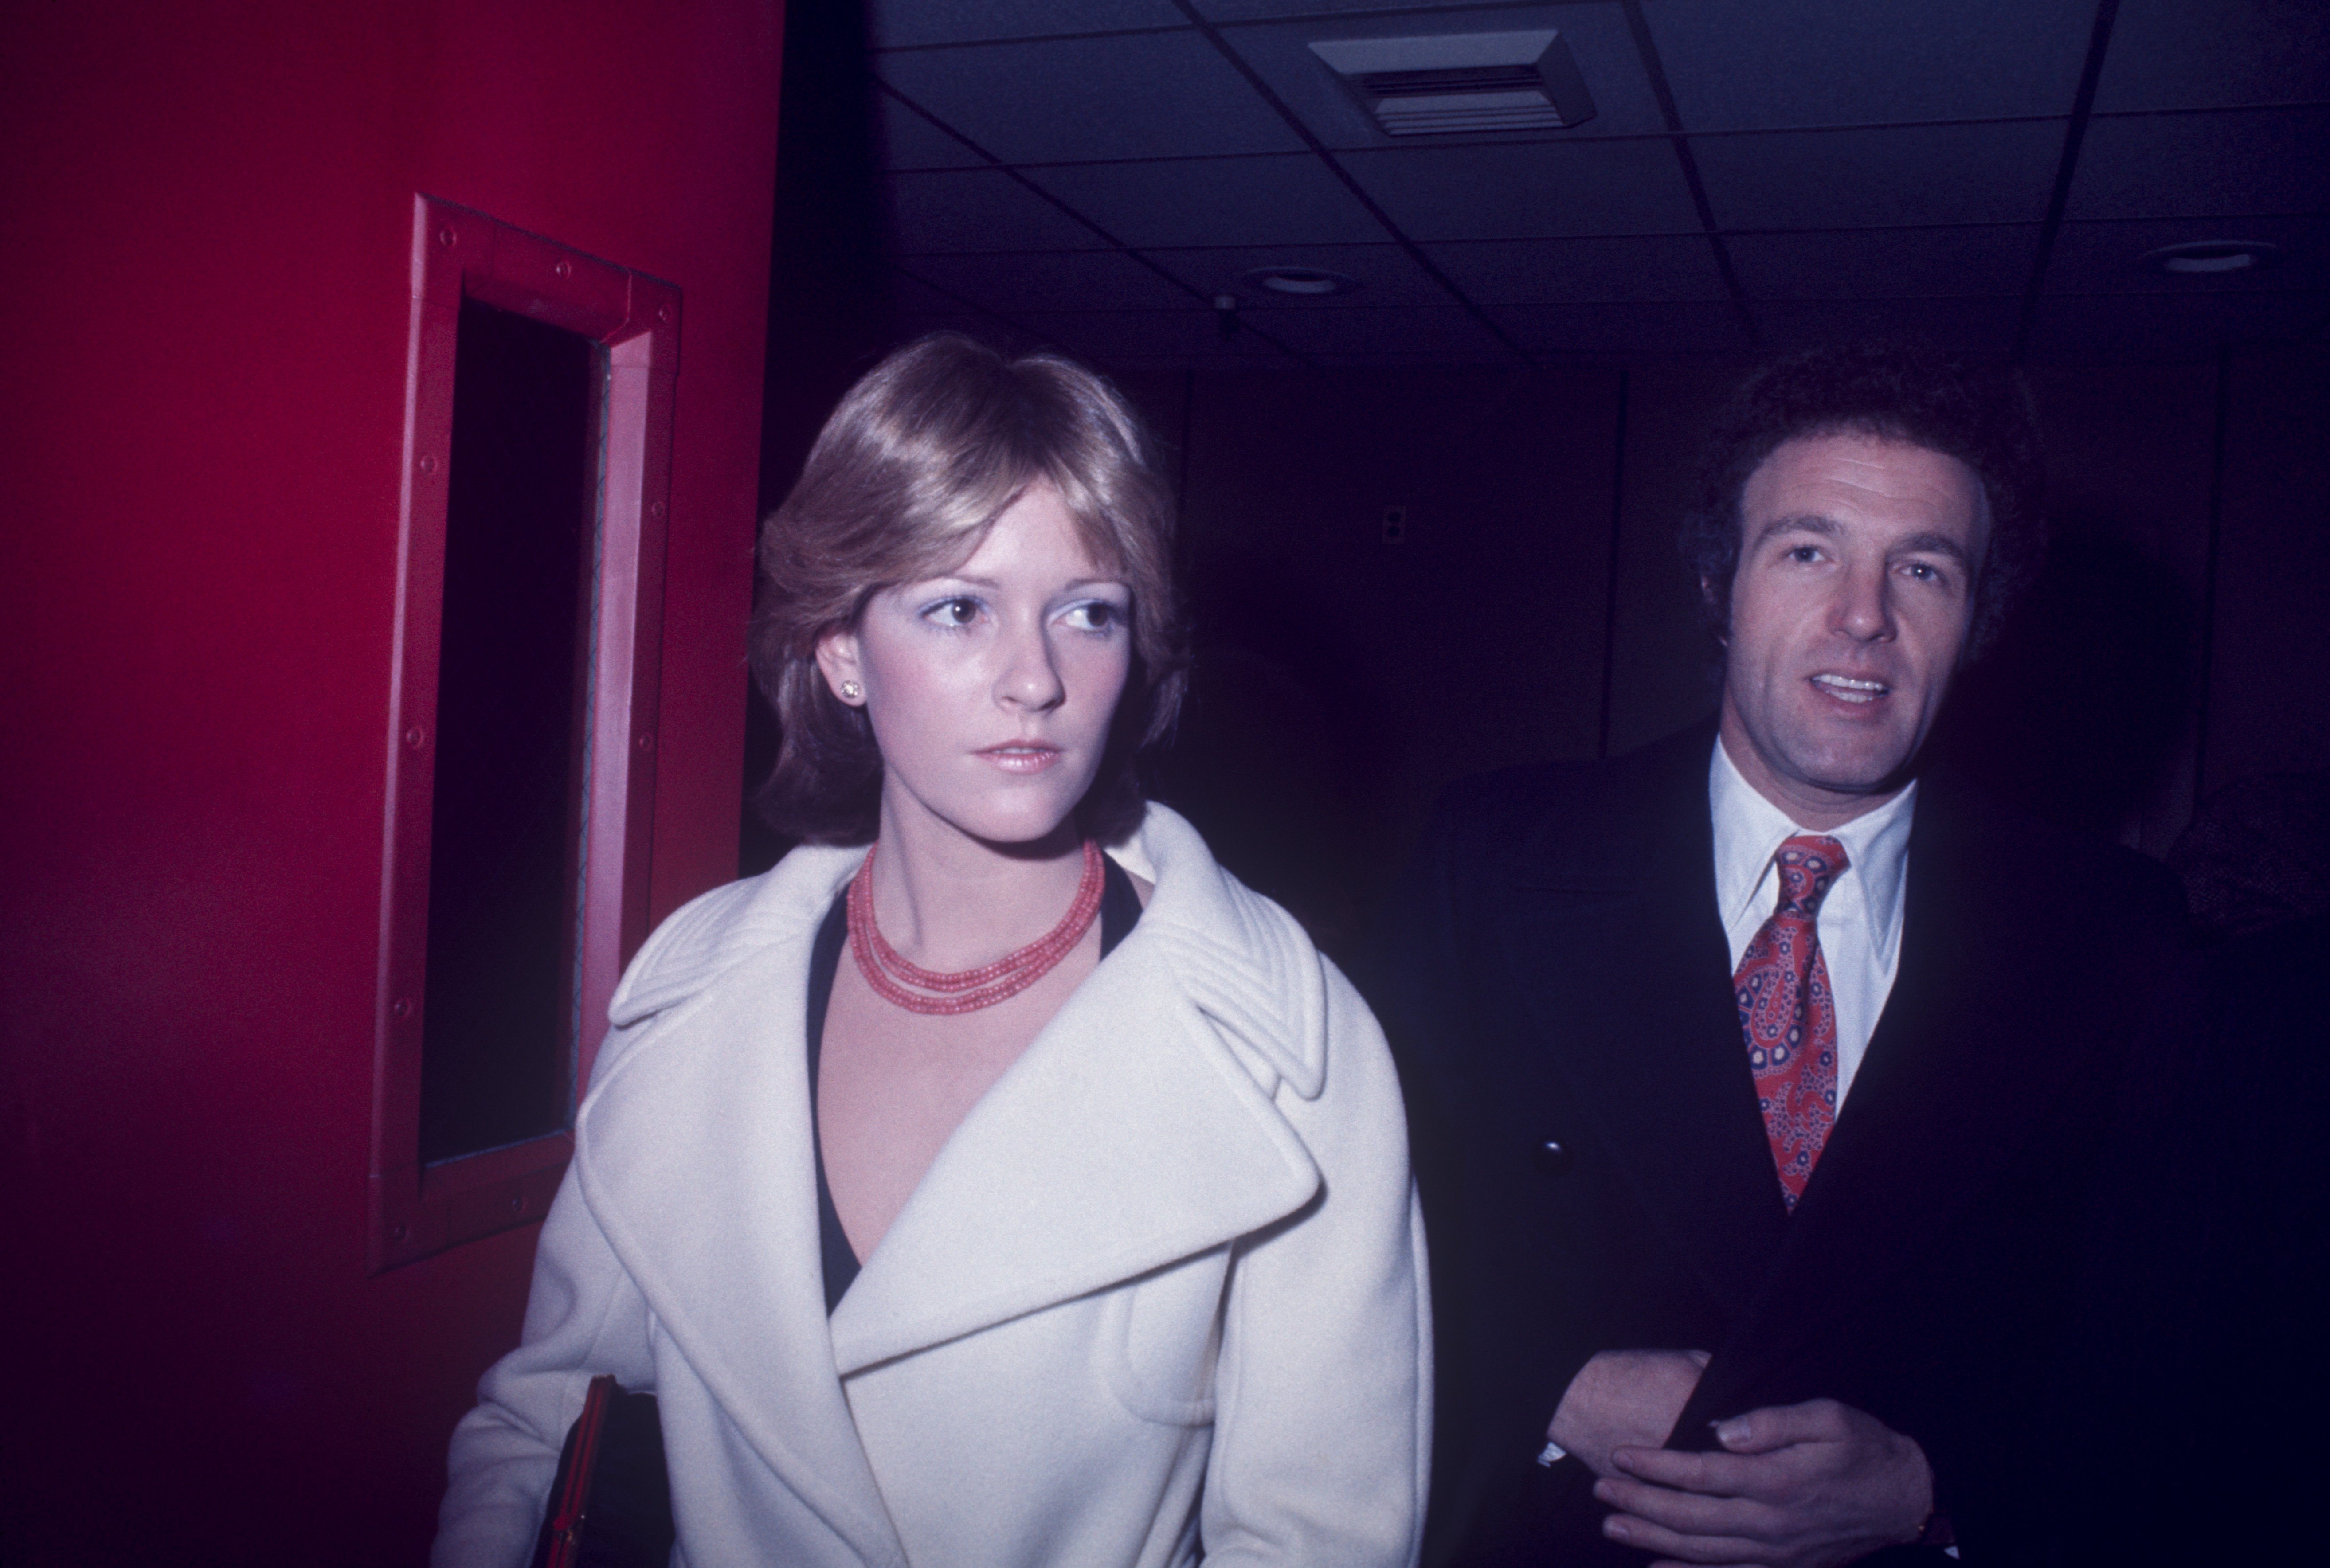 James Caan pictured with his wife model and actress Sheila Ryan in 1970 in New York. / Source: Getty Images